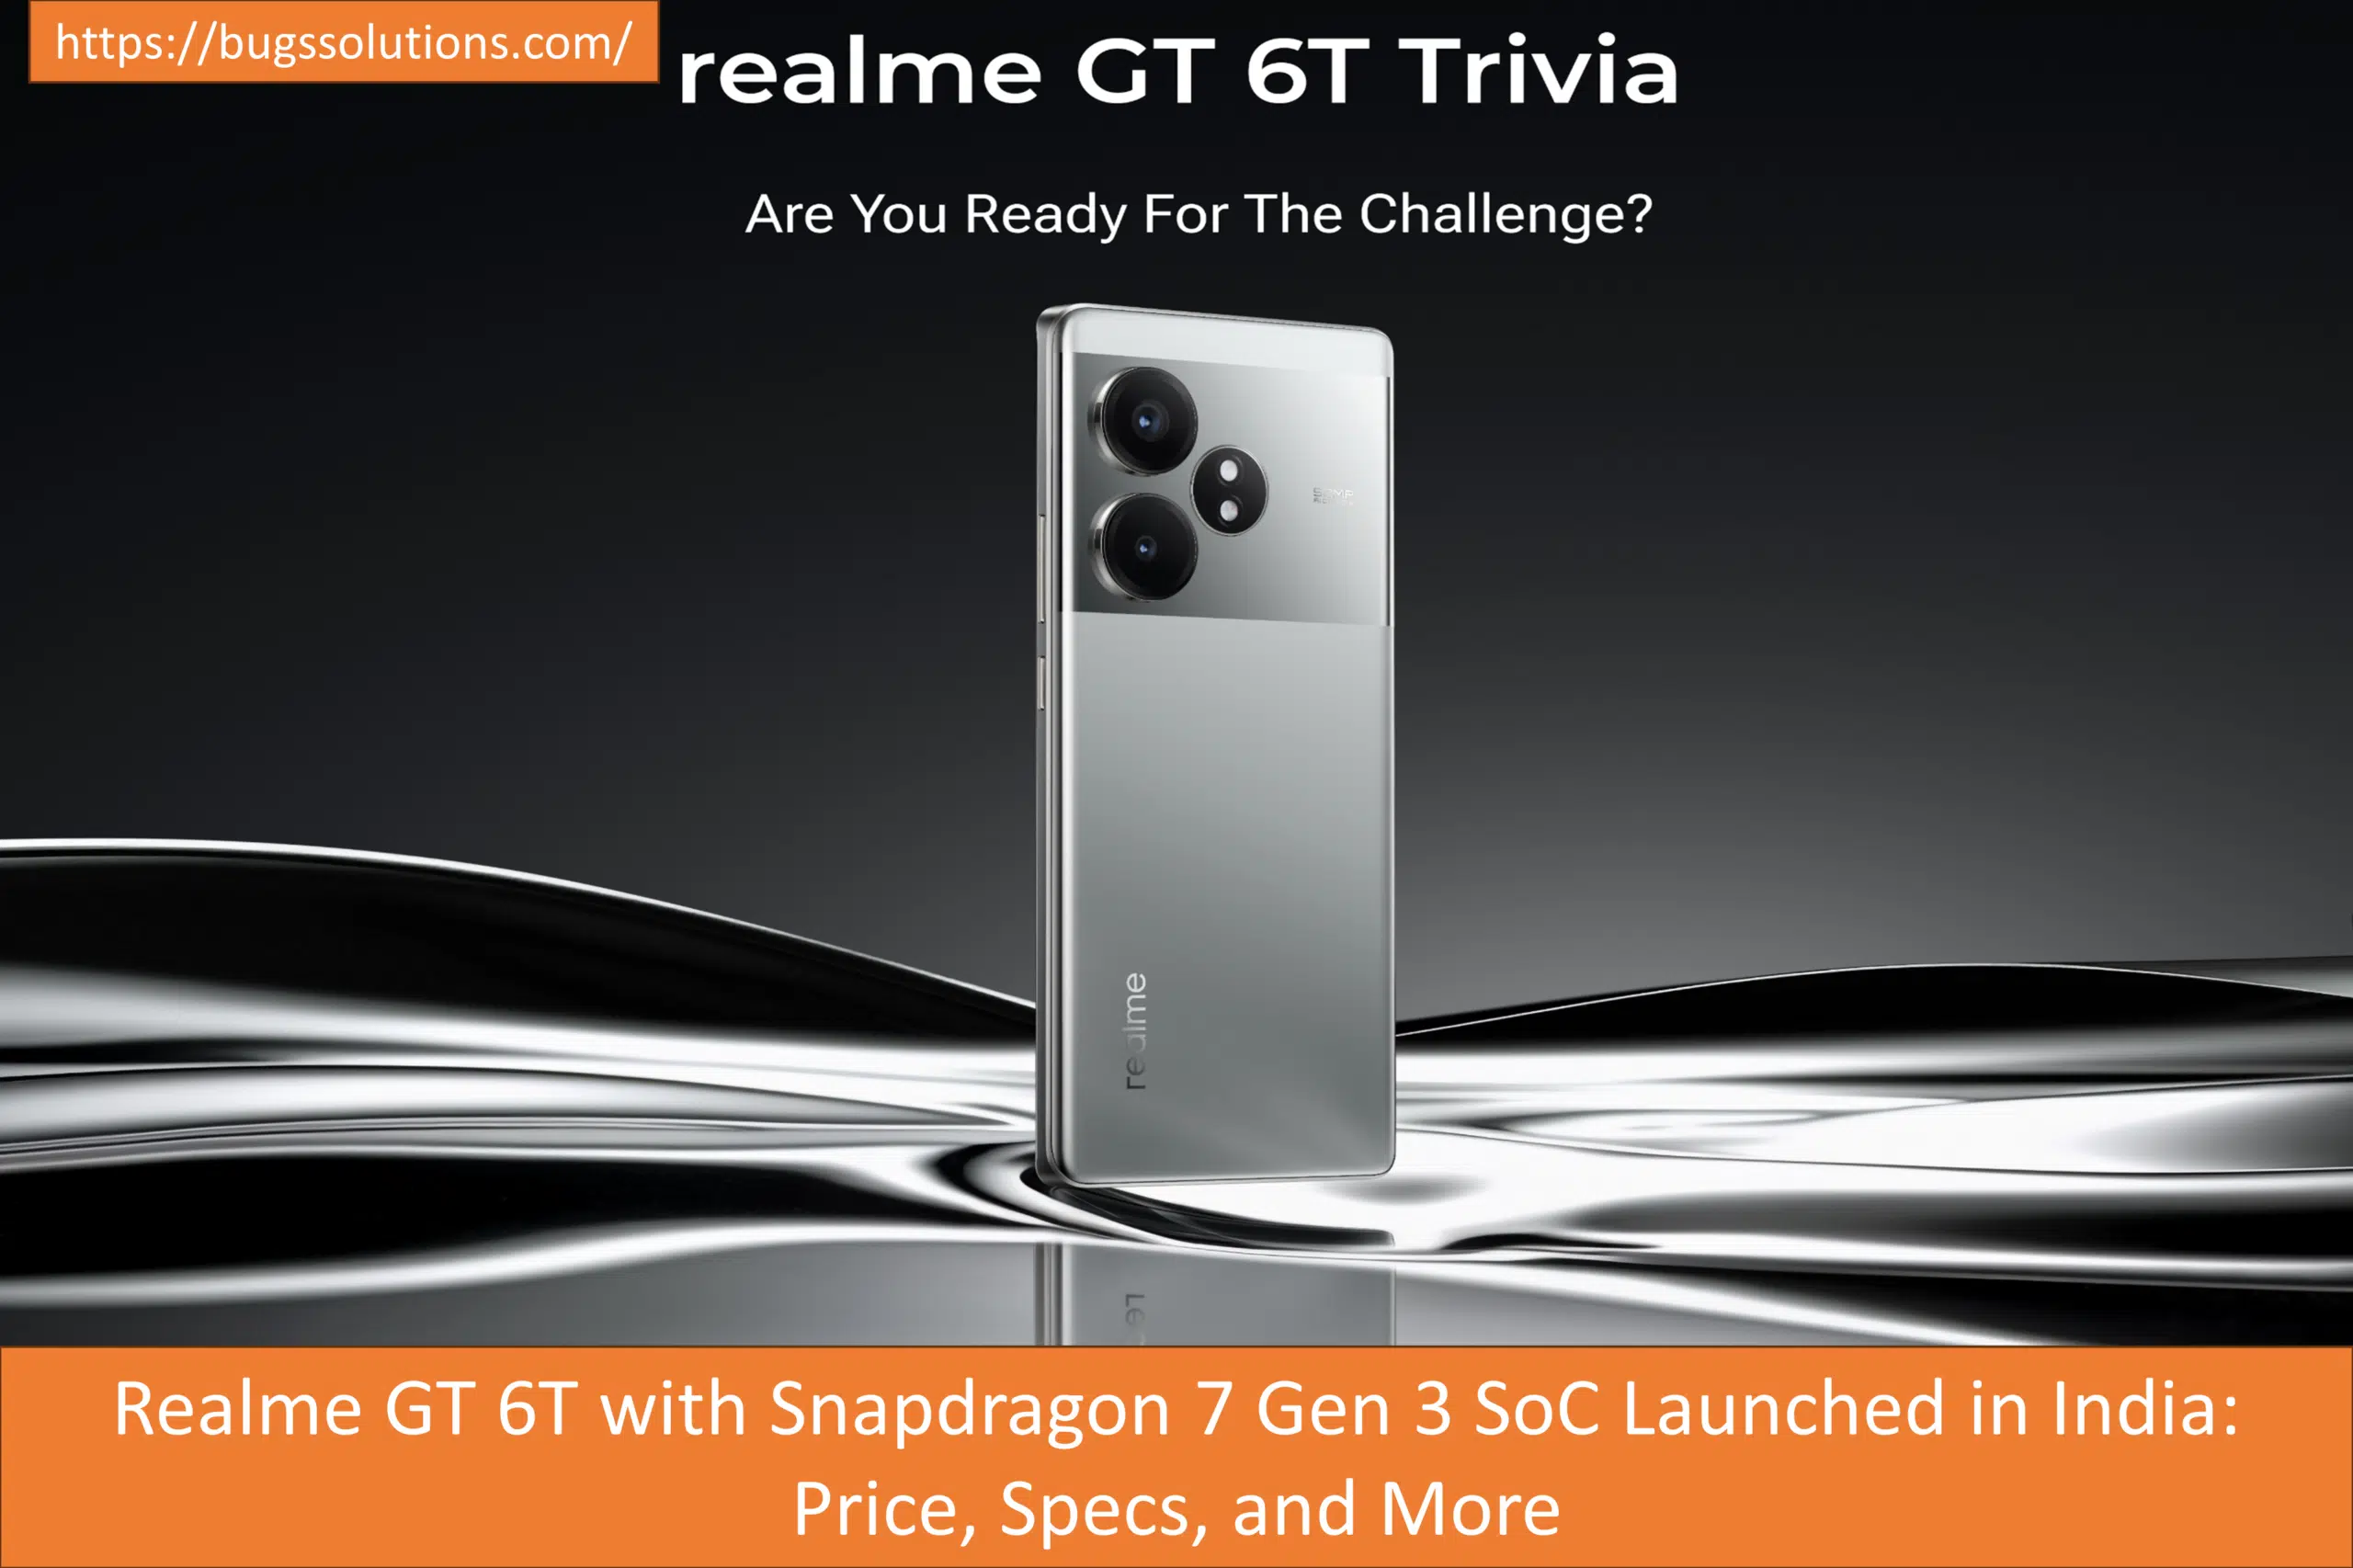 Realme GT 6T with Snapdragon 7 Gen 3 SoC Launched in India Price, Specs, and More